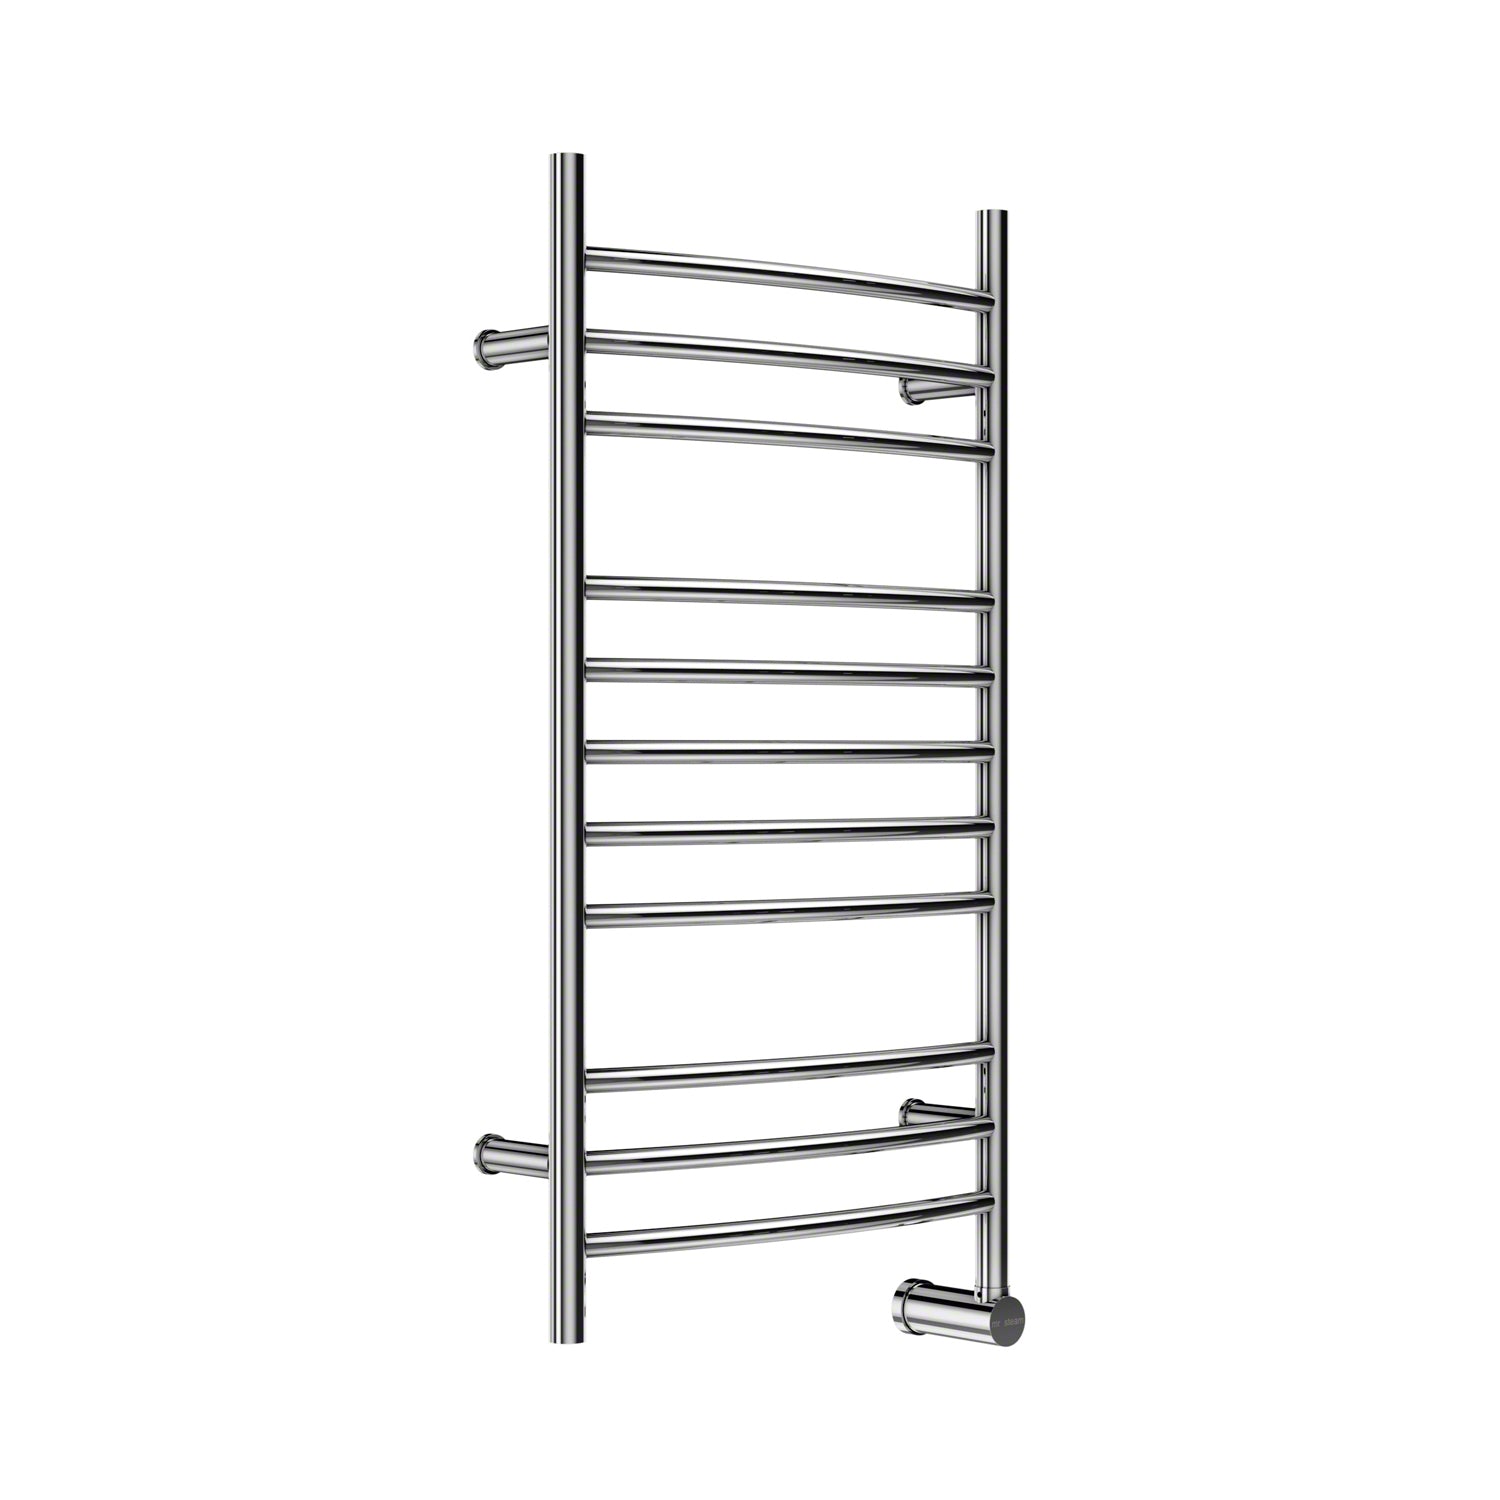 Mr.Steam Electric Towel Warmer with Digital Timer, Metro Collection W336T